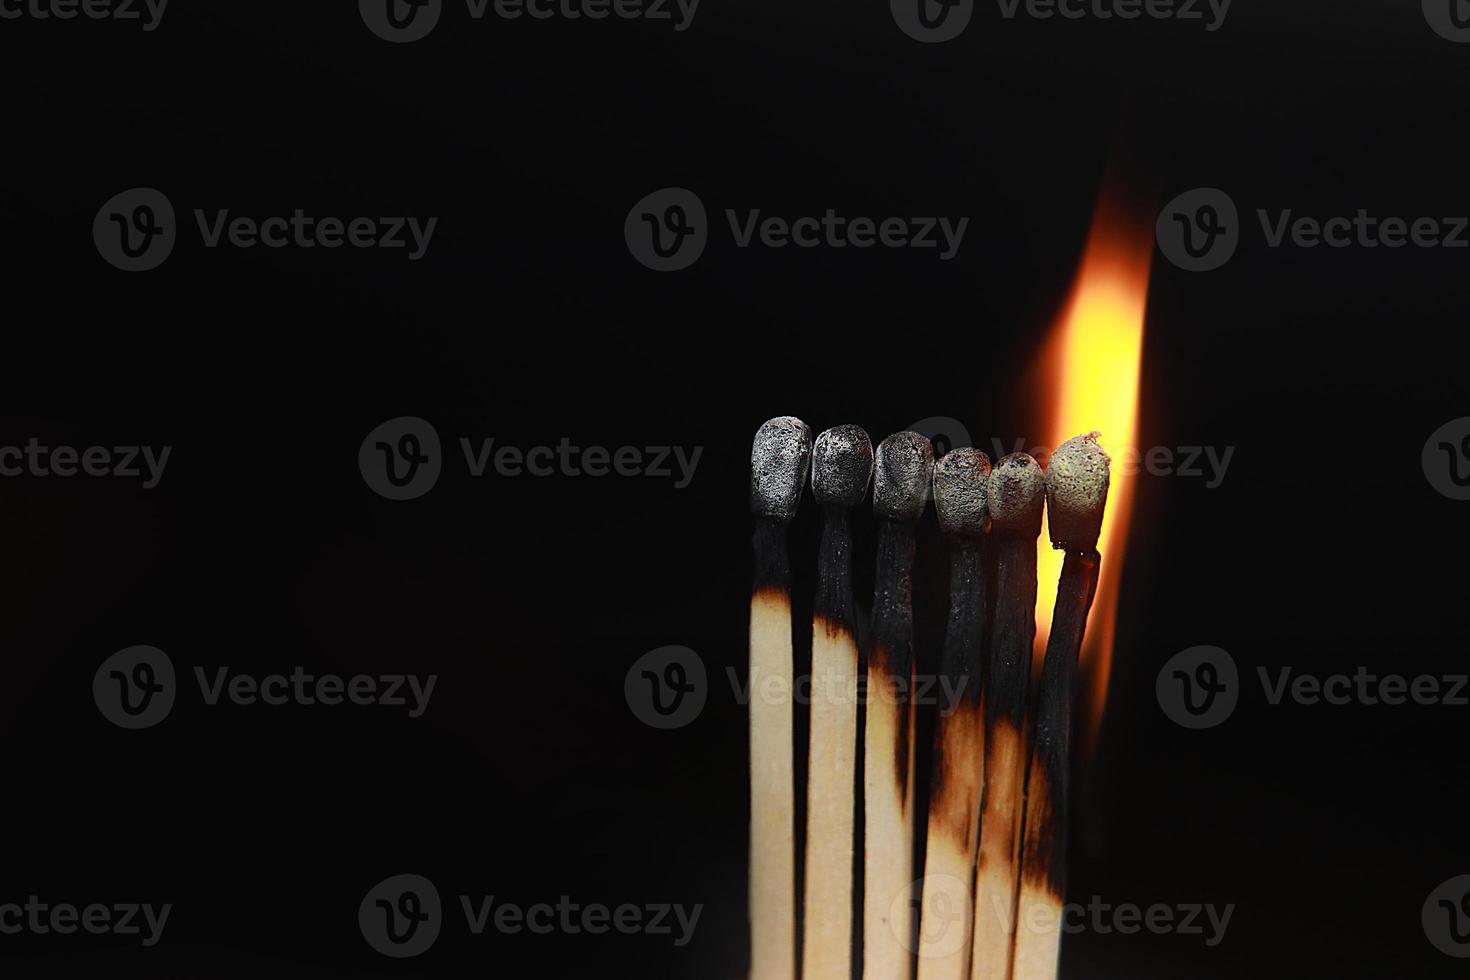 Burning matches on black background. matchsticks on fire in row of burning is sequence while one match stay down from burning to avoid fire connecting against black background photo